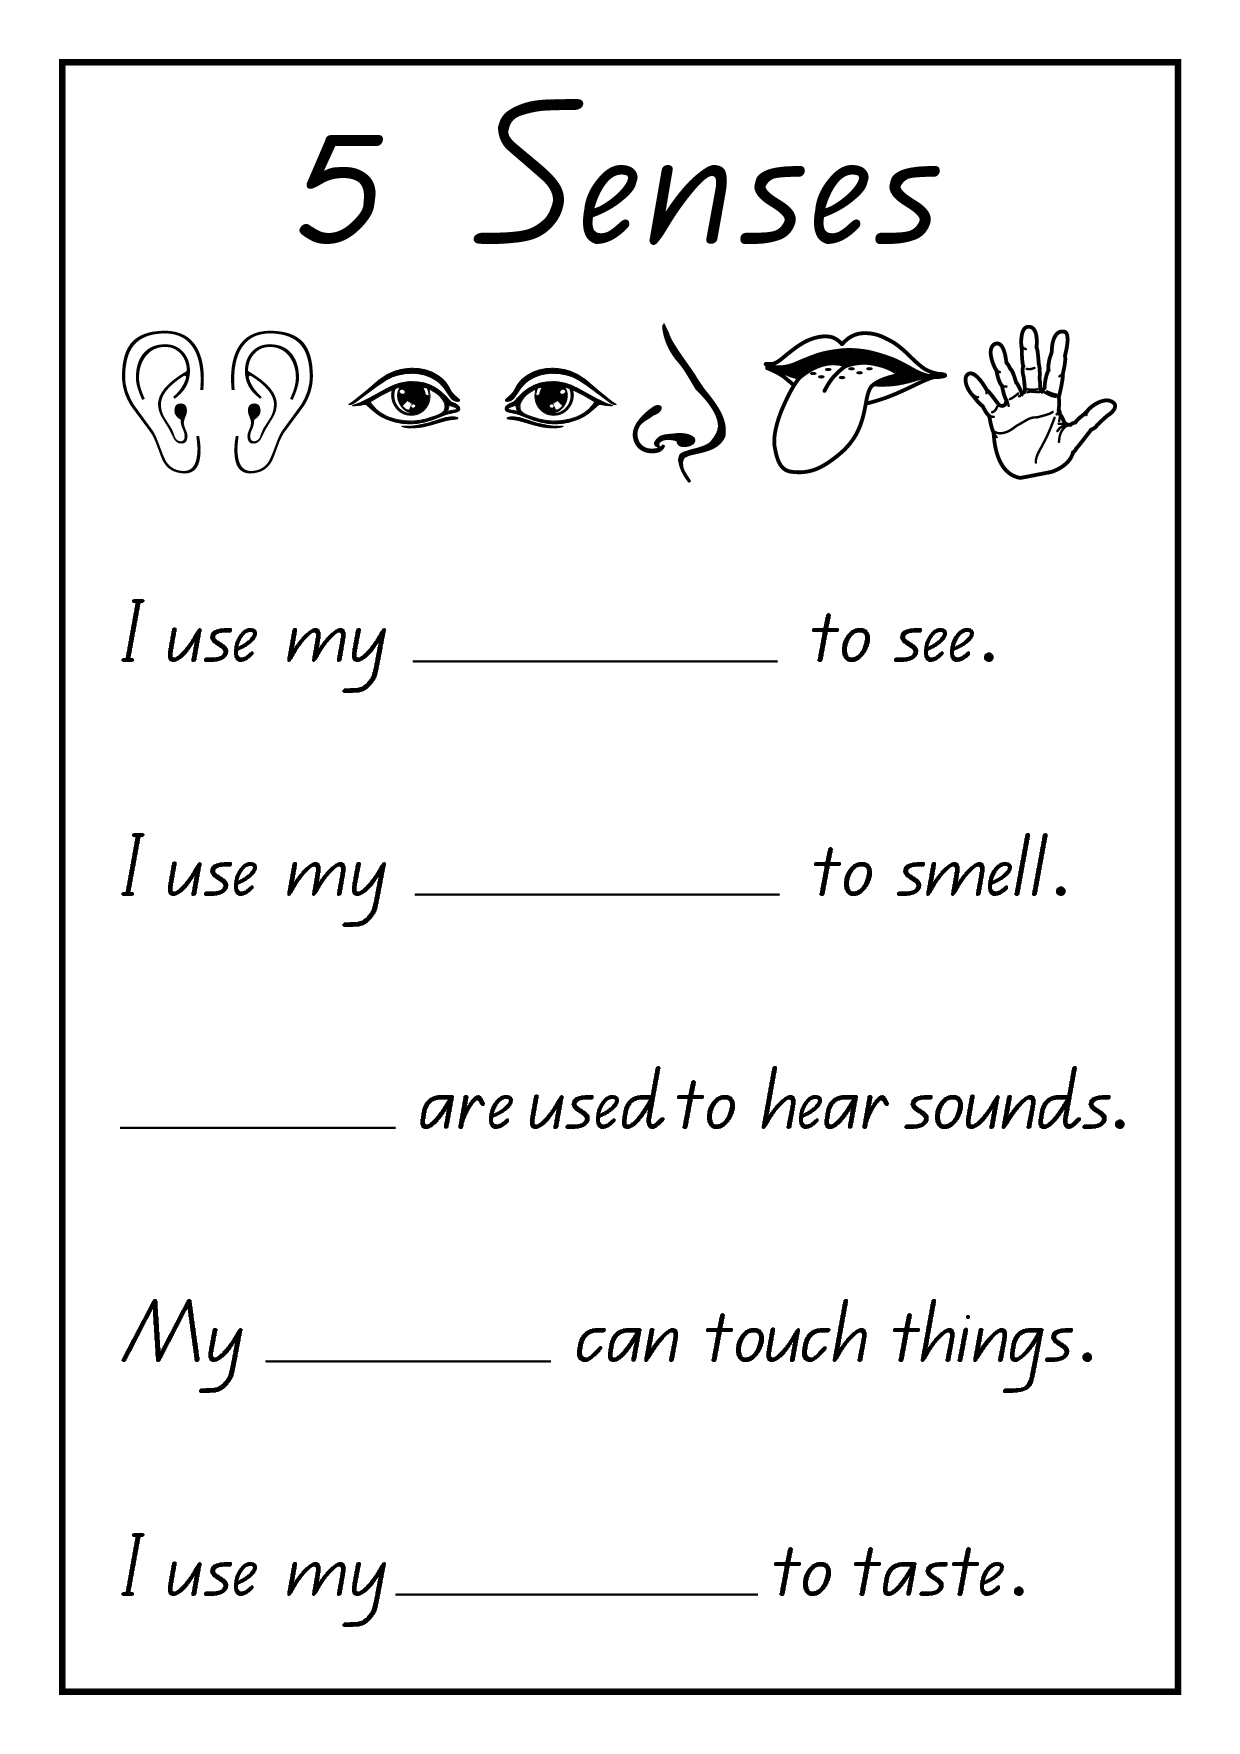 My Five Senses Worksheets Free - The Largest and Most ...